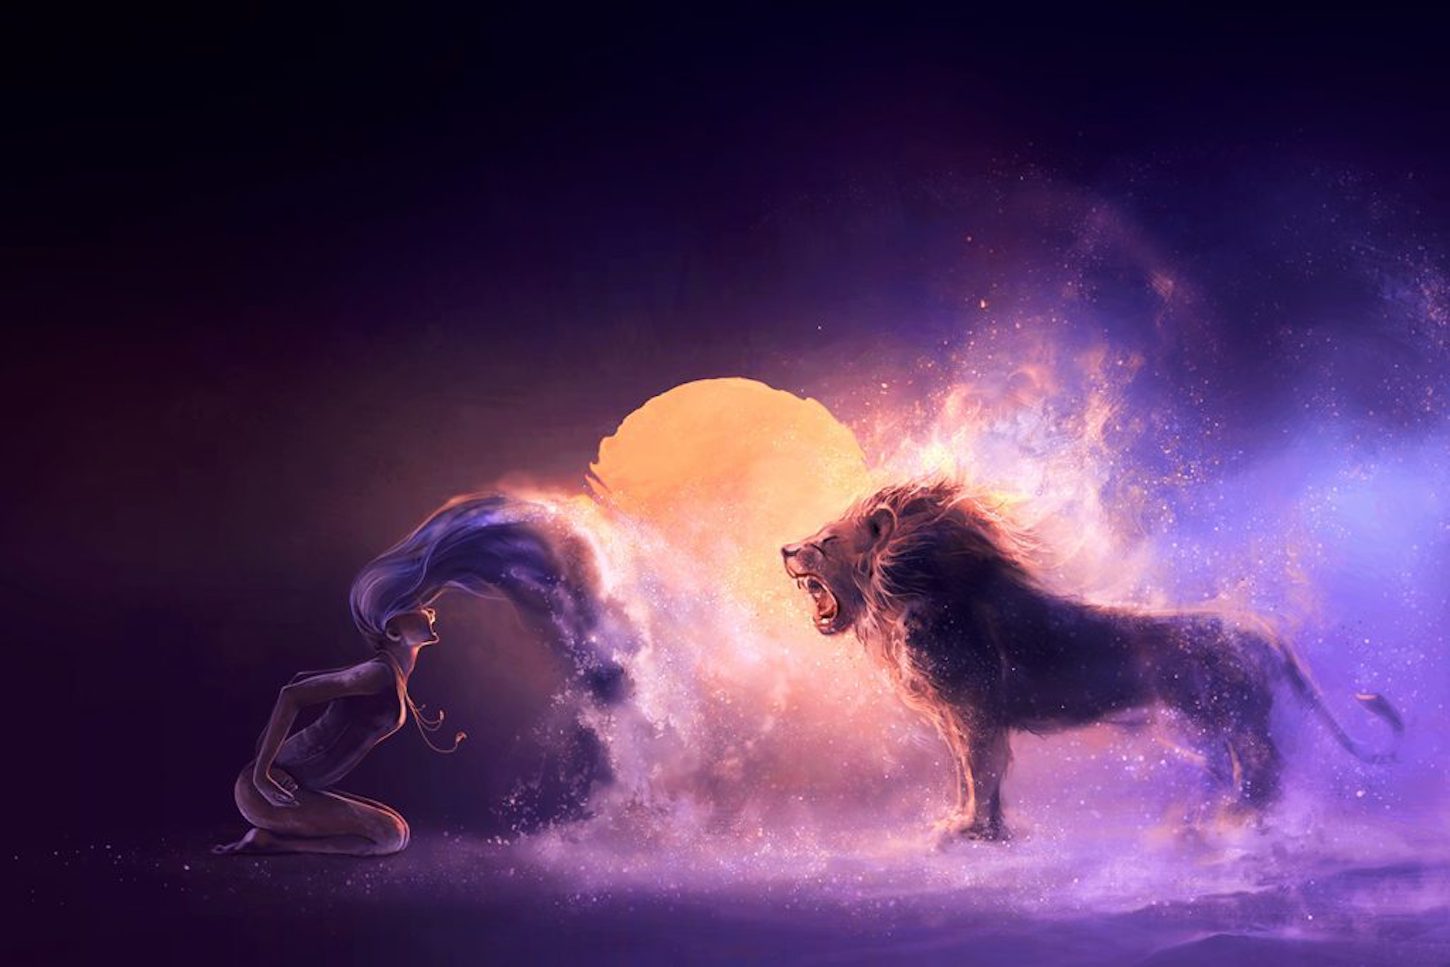 This week's Lionsgate portal unleashes powerful energies